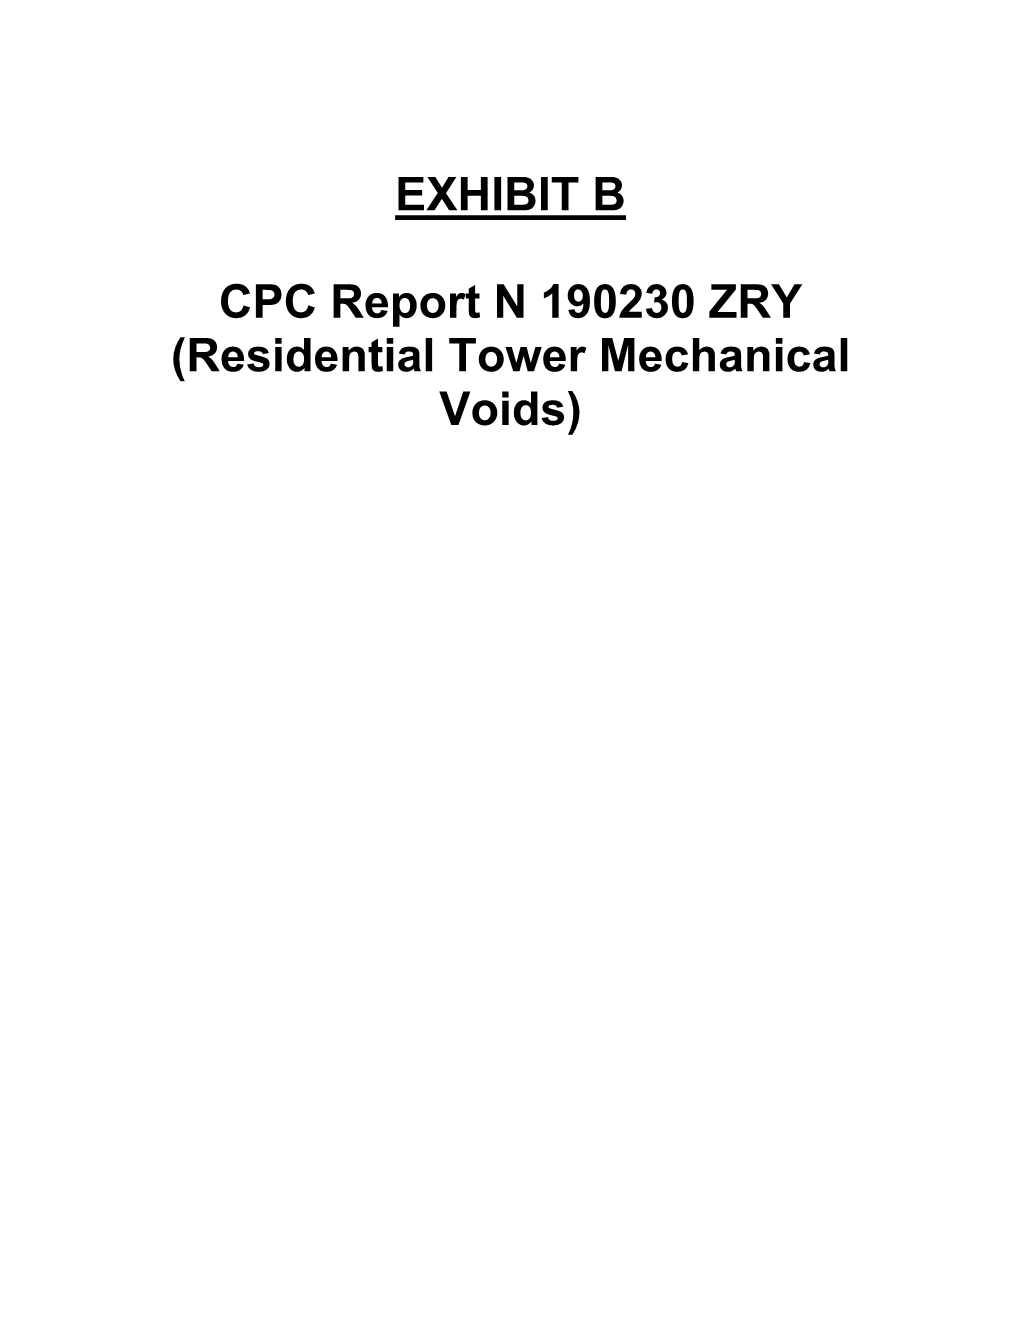 EXHIBIT B CPC Report N 190230 ZRY (Residential Tower